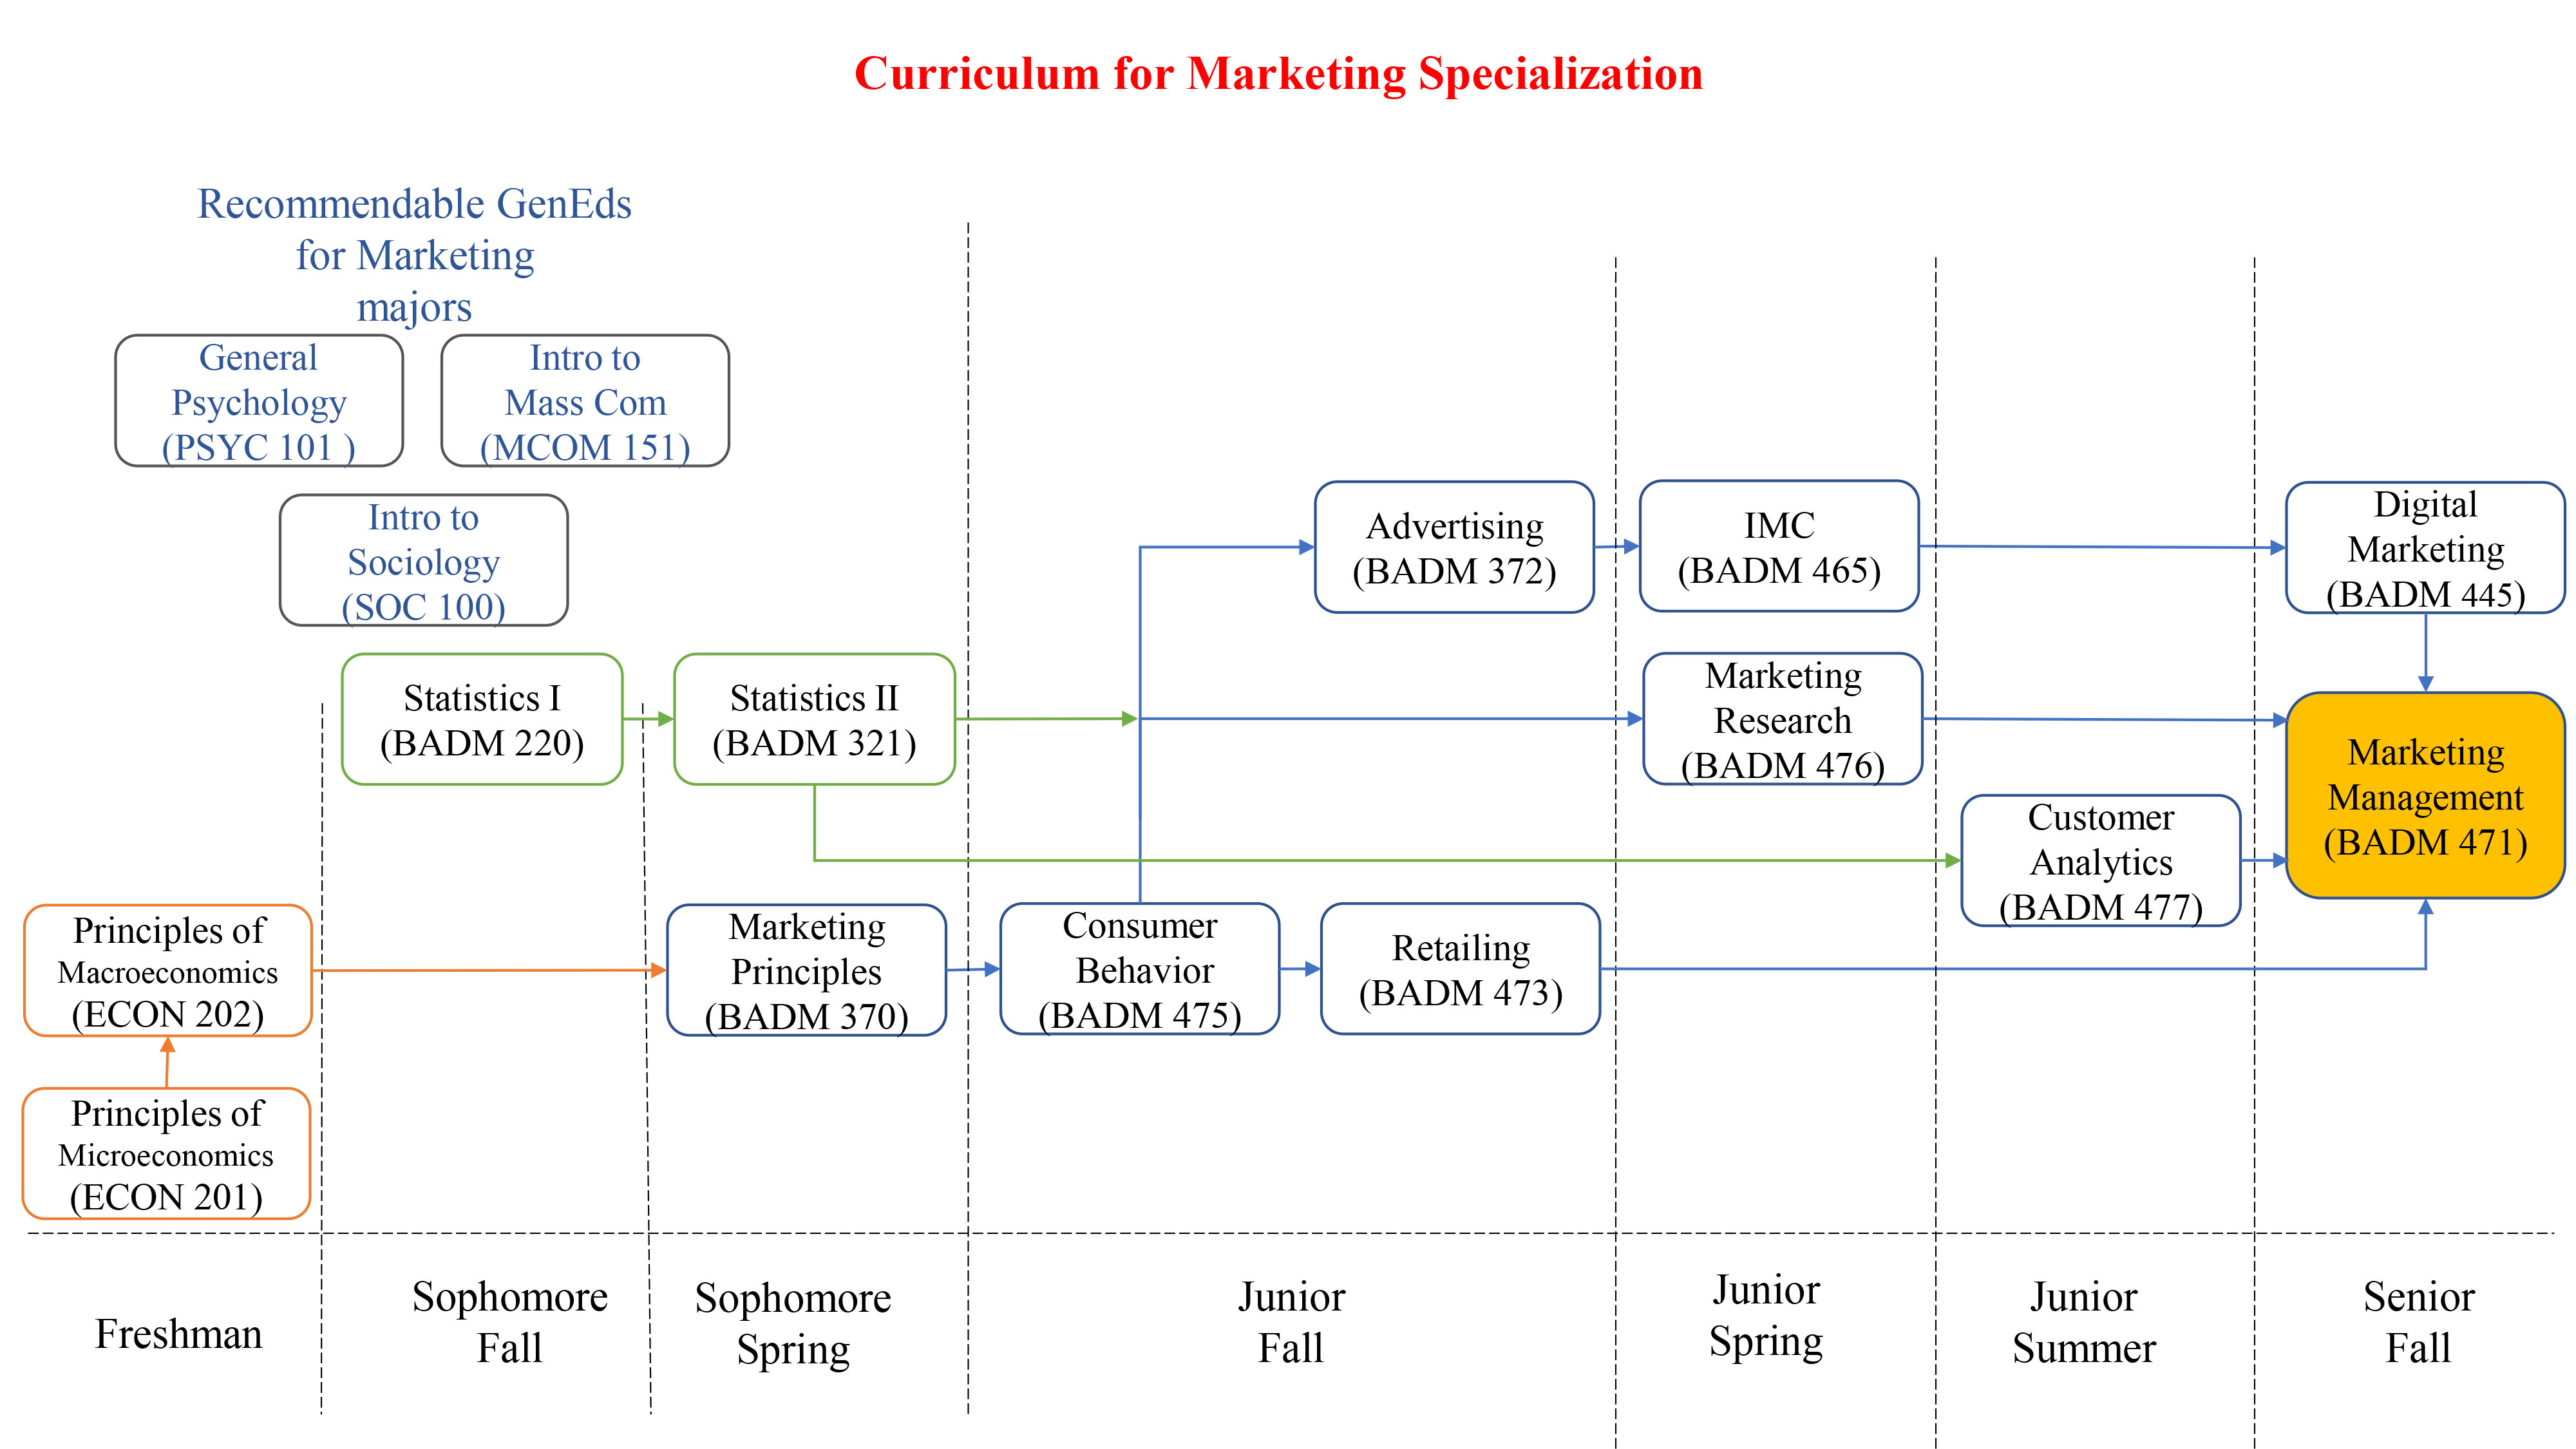 Flow chart depicting the curriculum for Marketing Specialization.